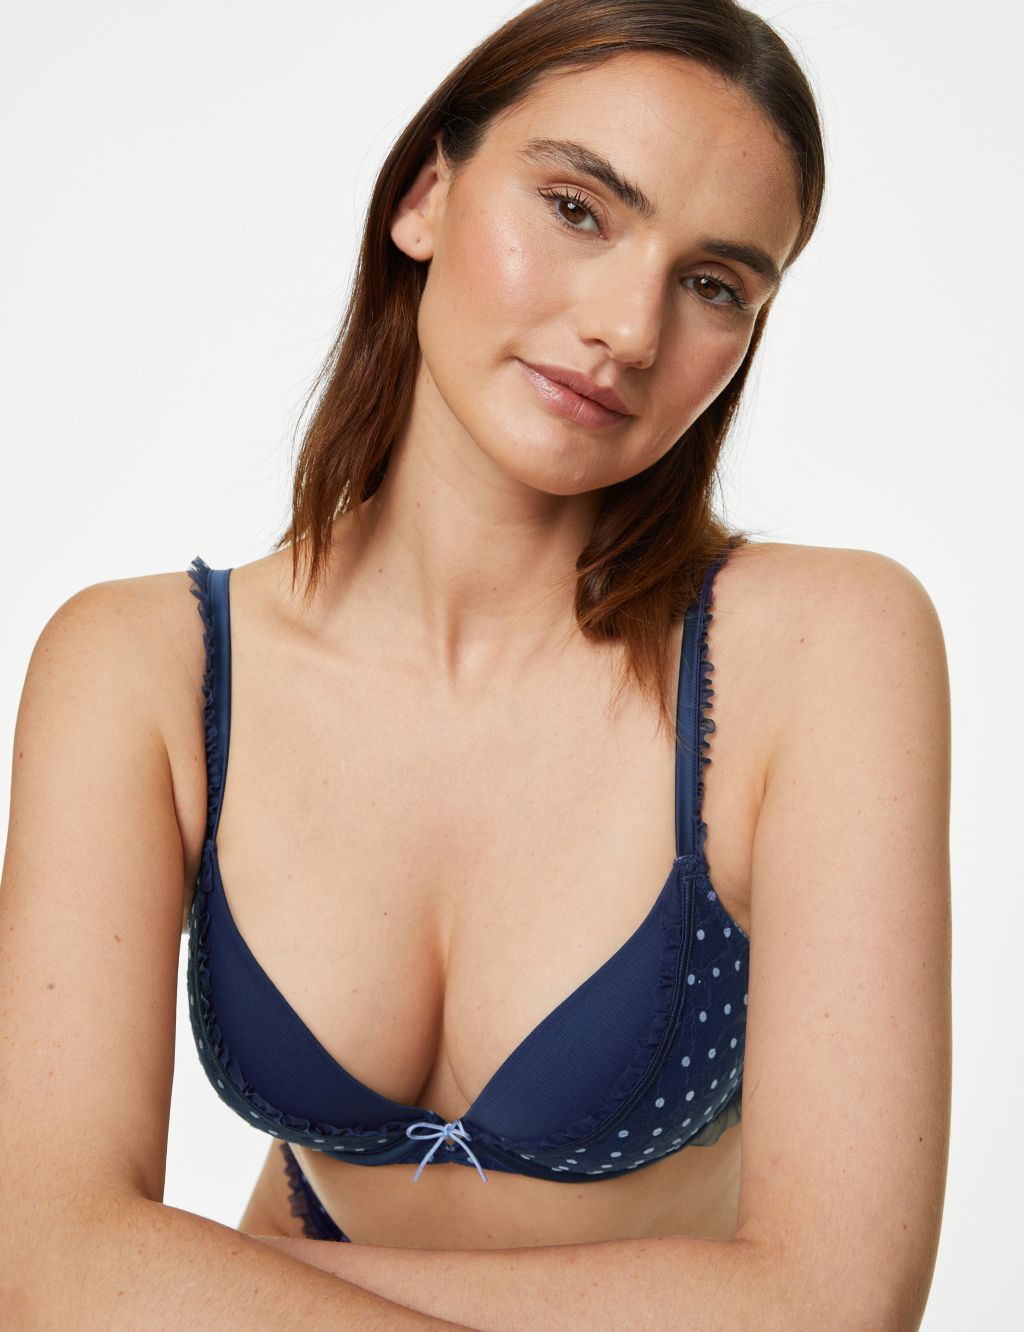 Anna Lace Wired Push-Up Bra image 3